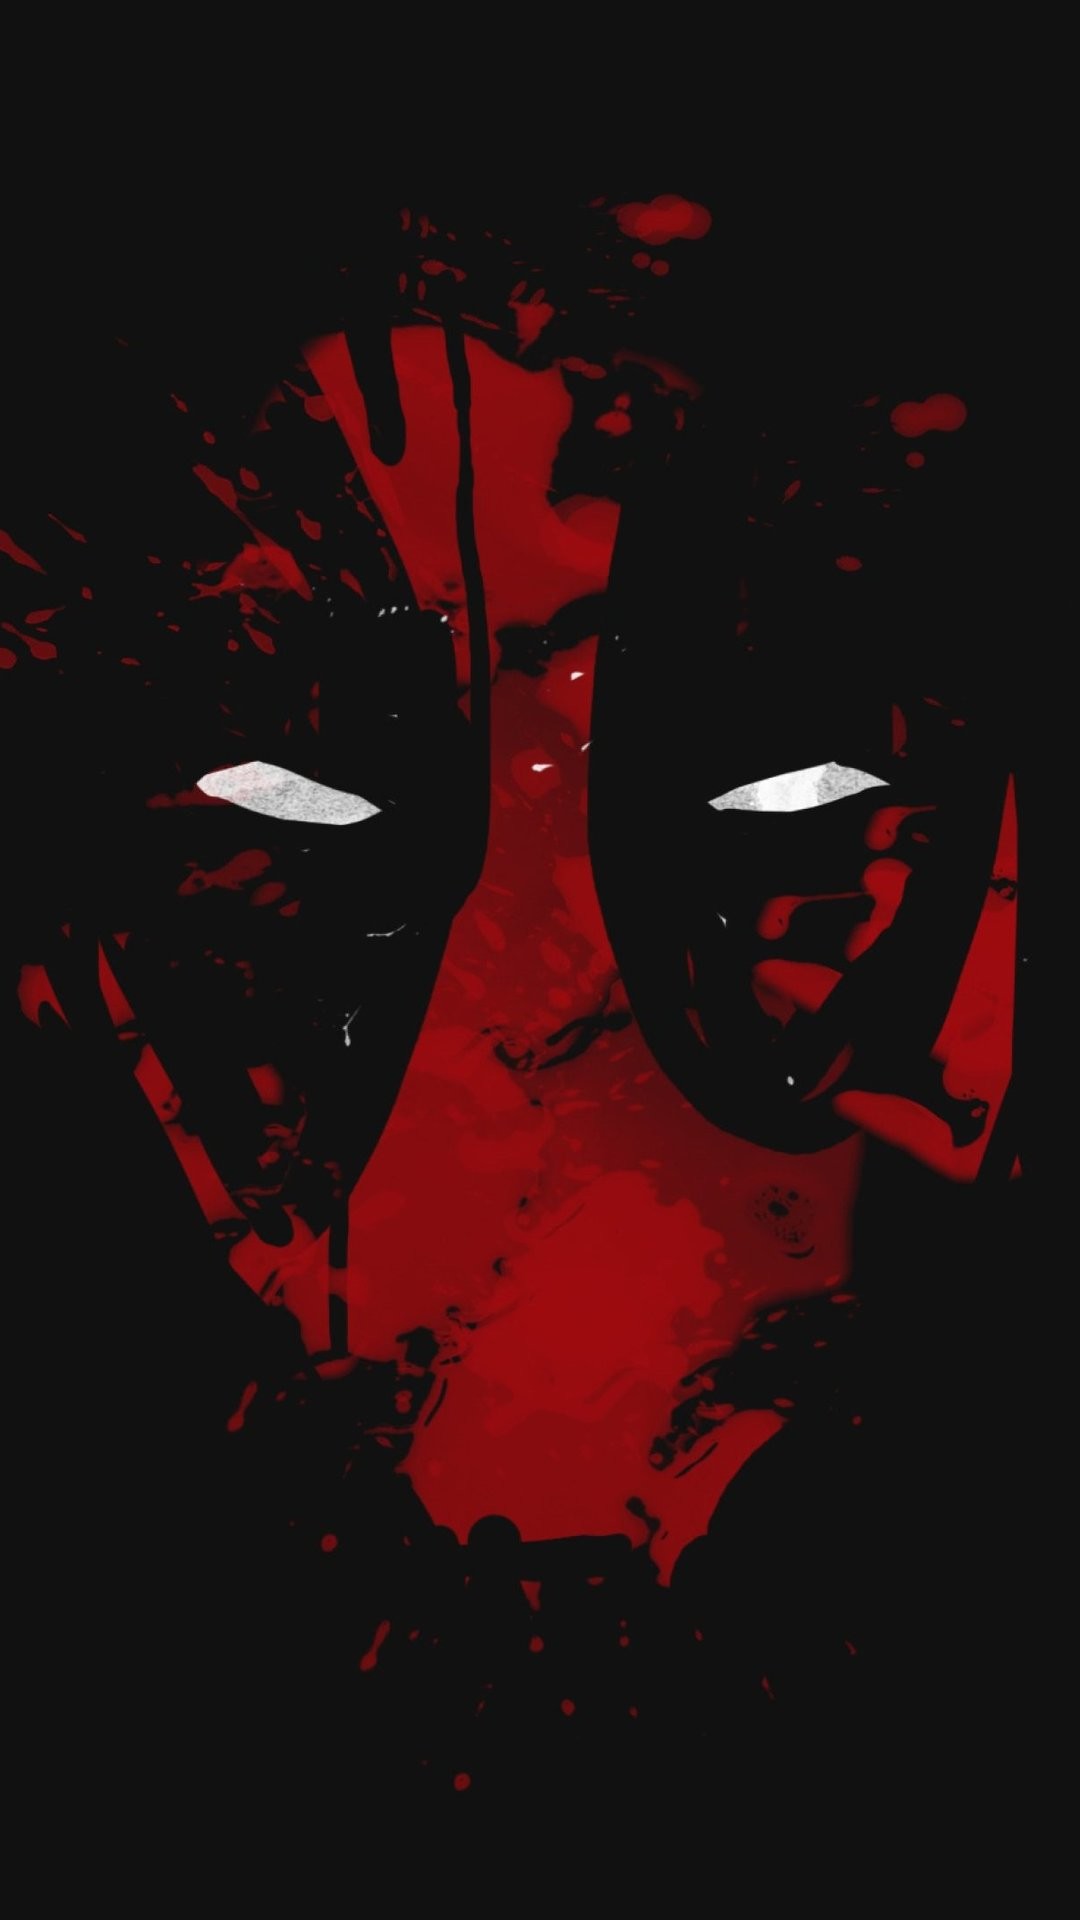 1080x1920 Deadpool Abstract 4k (Iphone 7,6s,6 Plus, Pixel xl ,One Plus 3,3t,5)